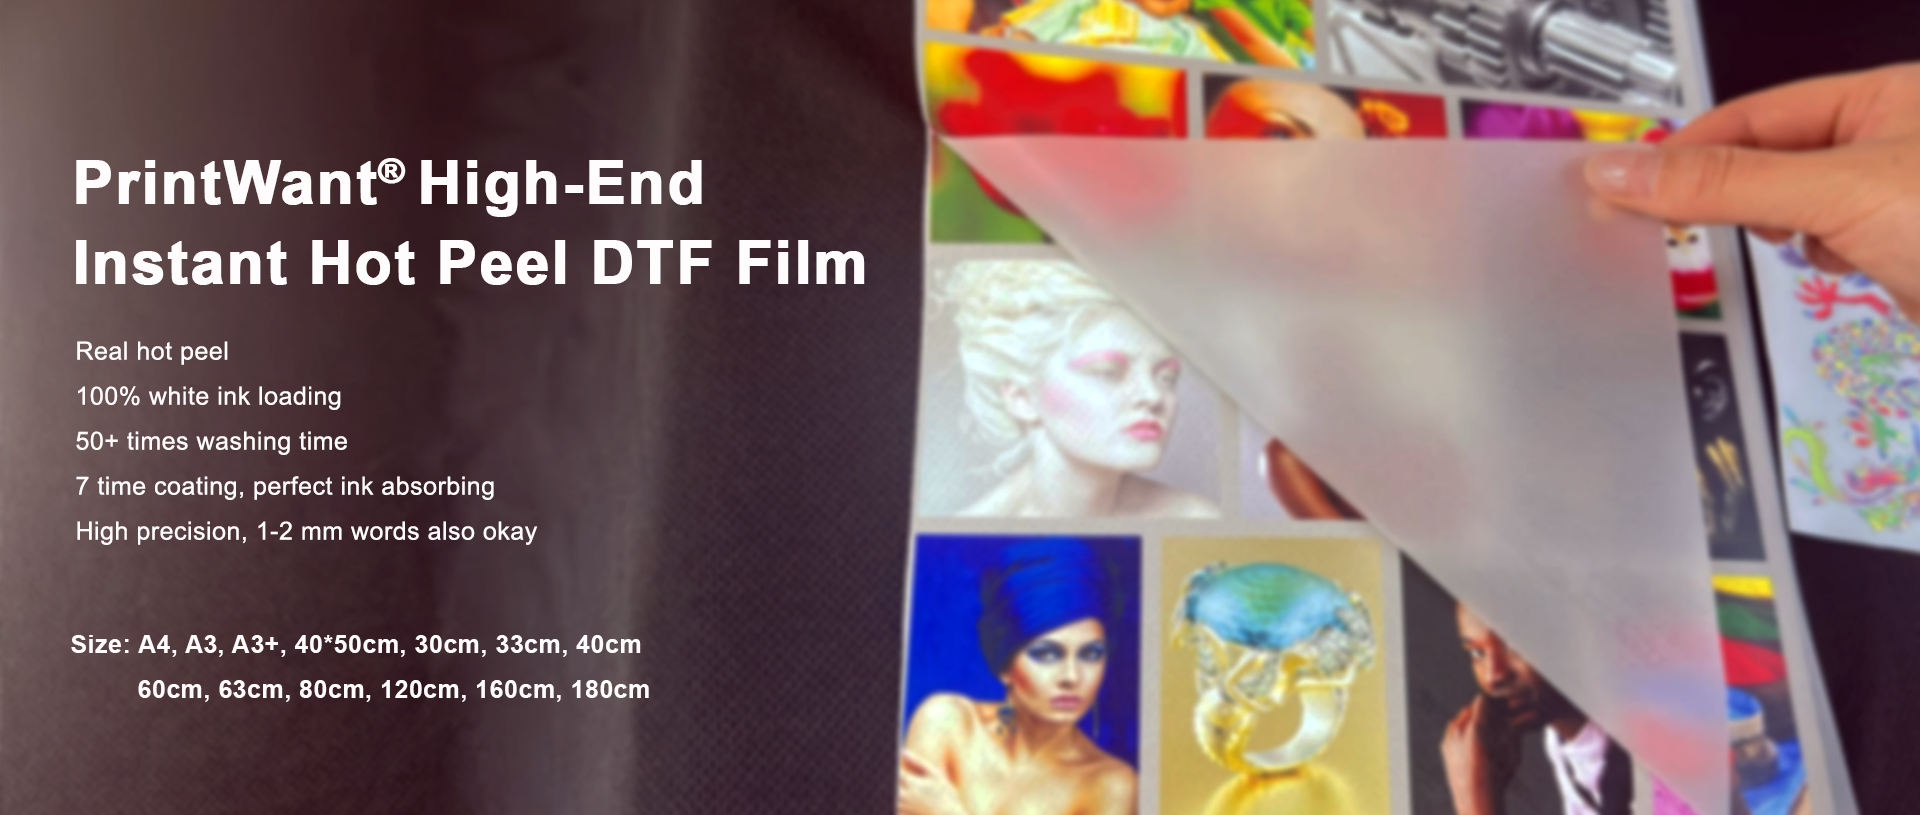 PrintWant's DTF Pet Film: the industry model for perfect Instant Hot Peel effects